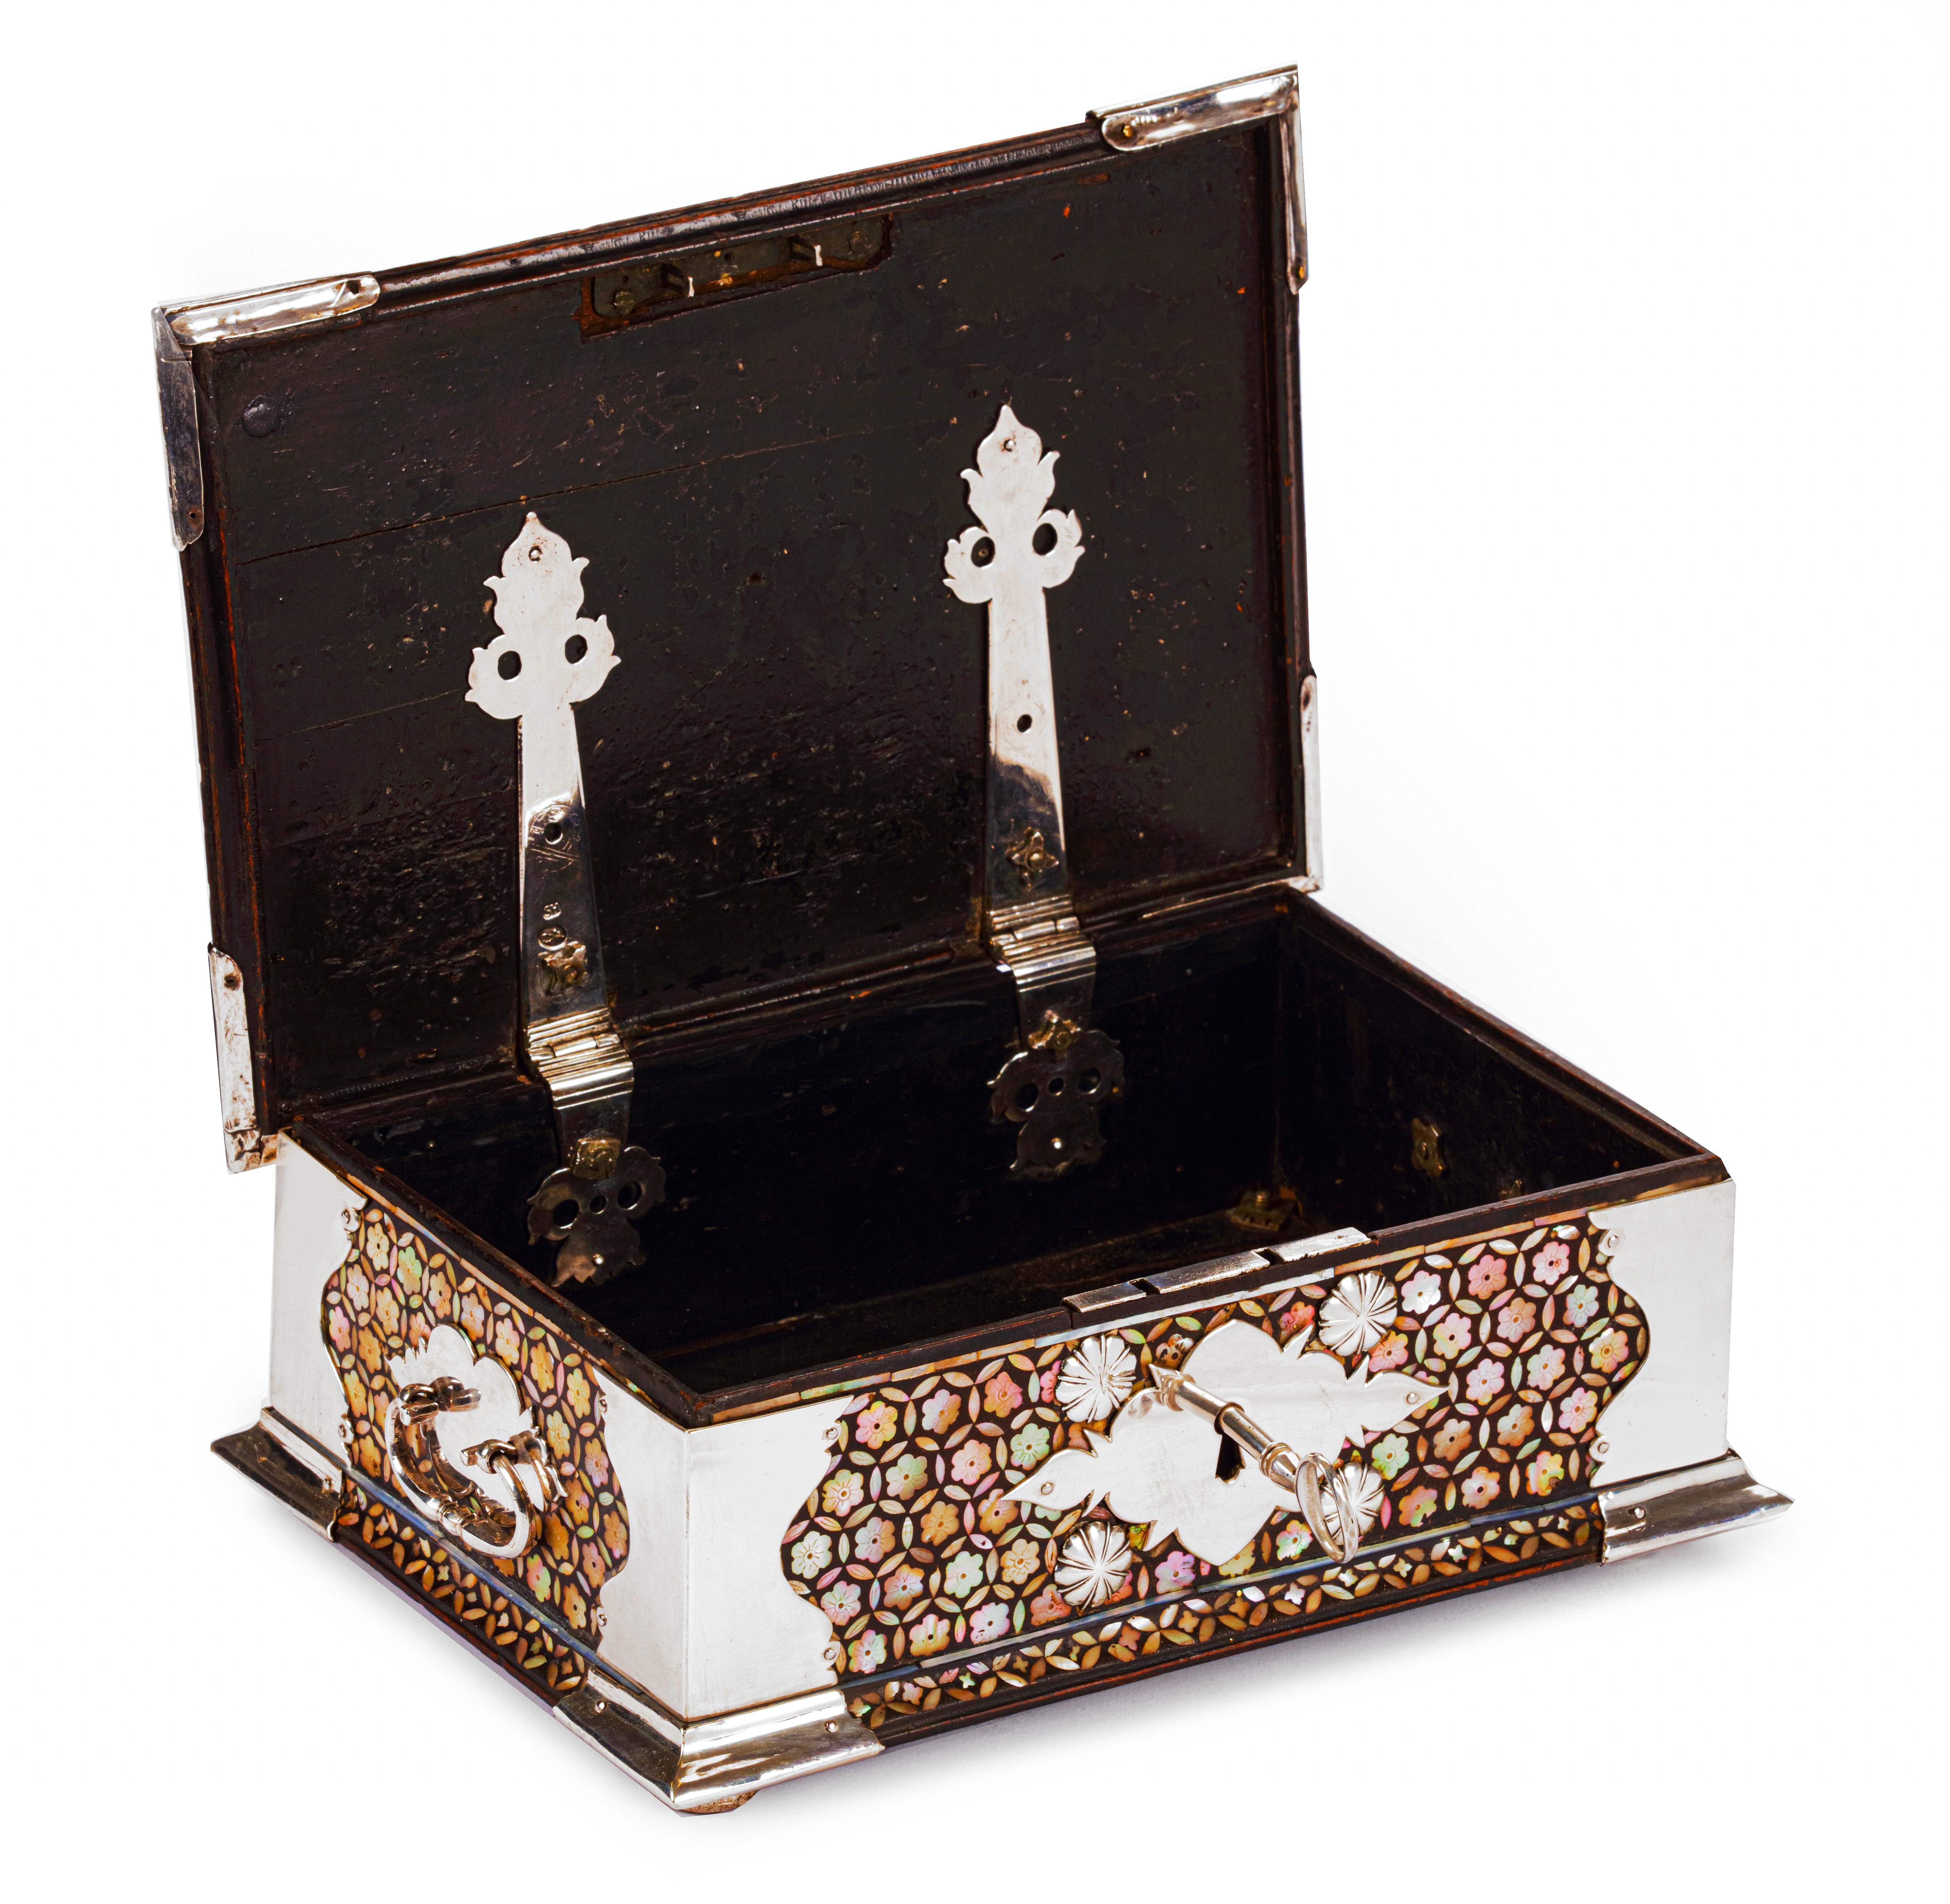 Inlay 18th-century Dutch-colonial Peranakan mother-of-pearl casket with silver mounts For Sale